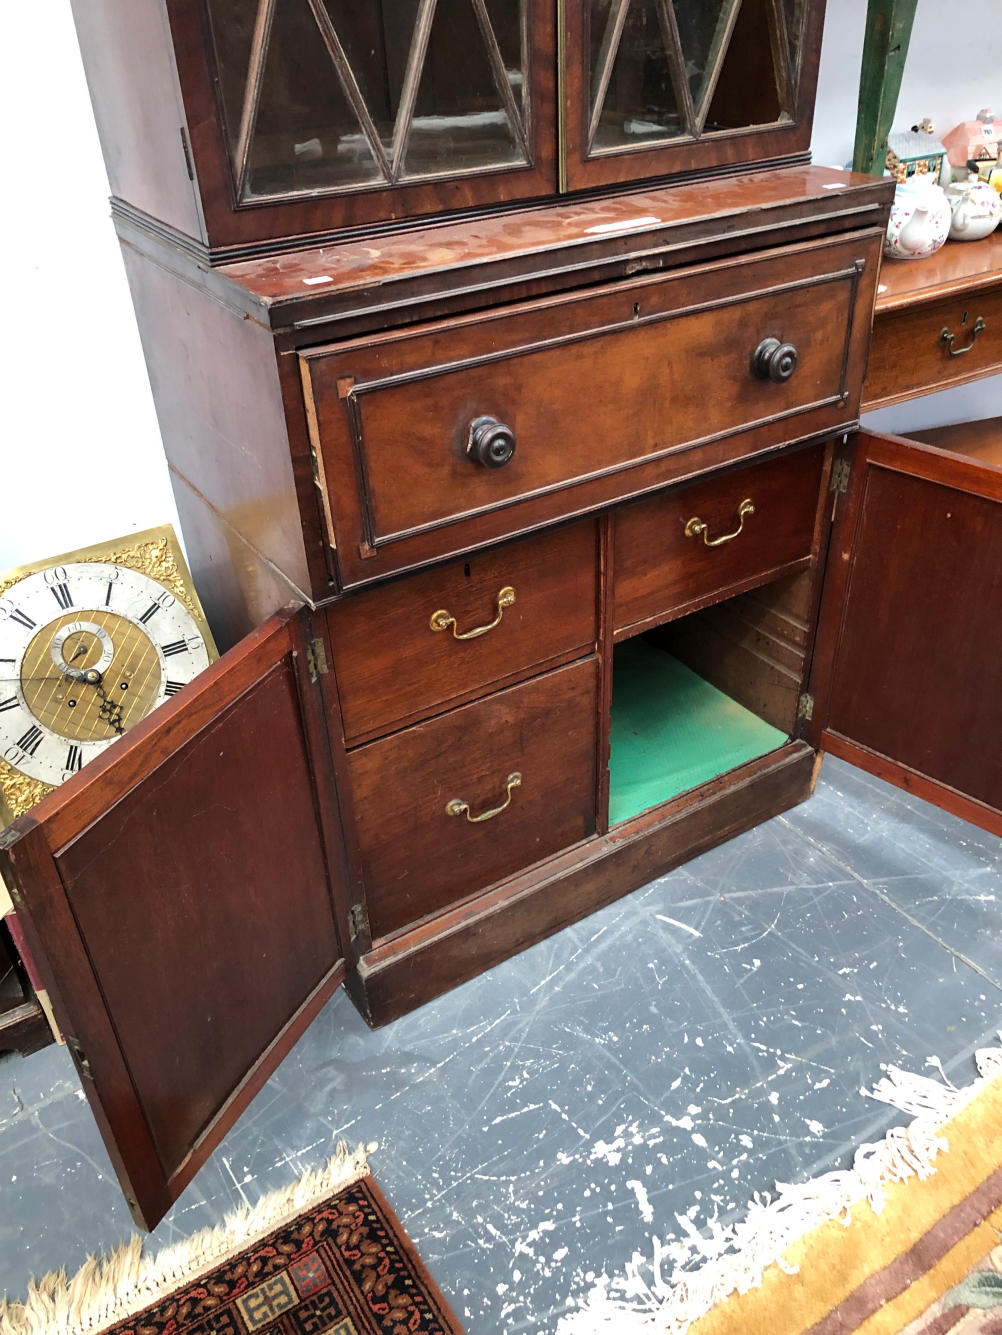 A GEORGE III MAHOGANY SECRETAIRE BOOKCASE WITH CABINET BASE FITTED WITH DRAWERS. 222 X 88 X 51CMS. - Image 17 of 23